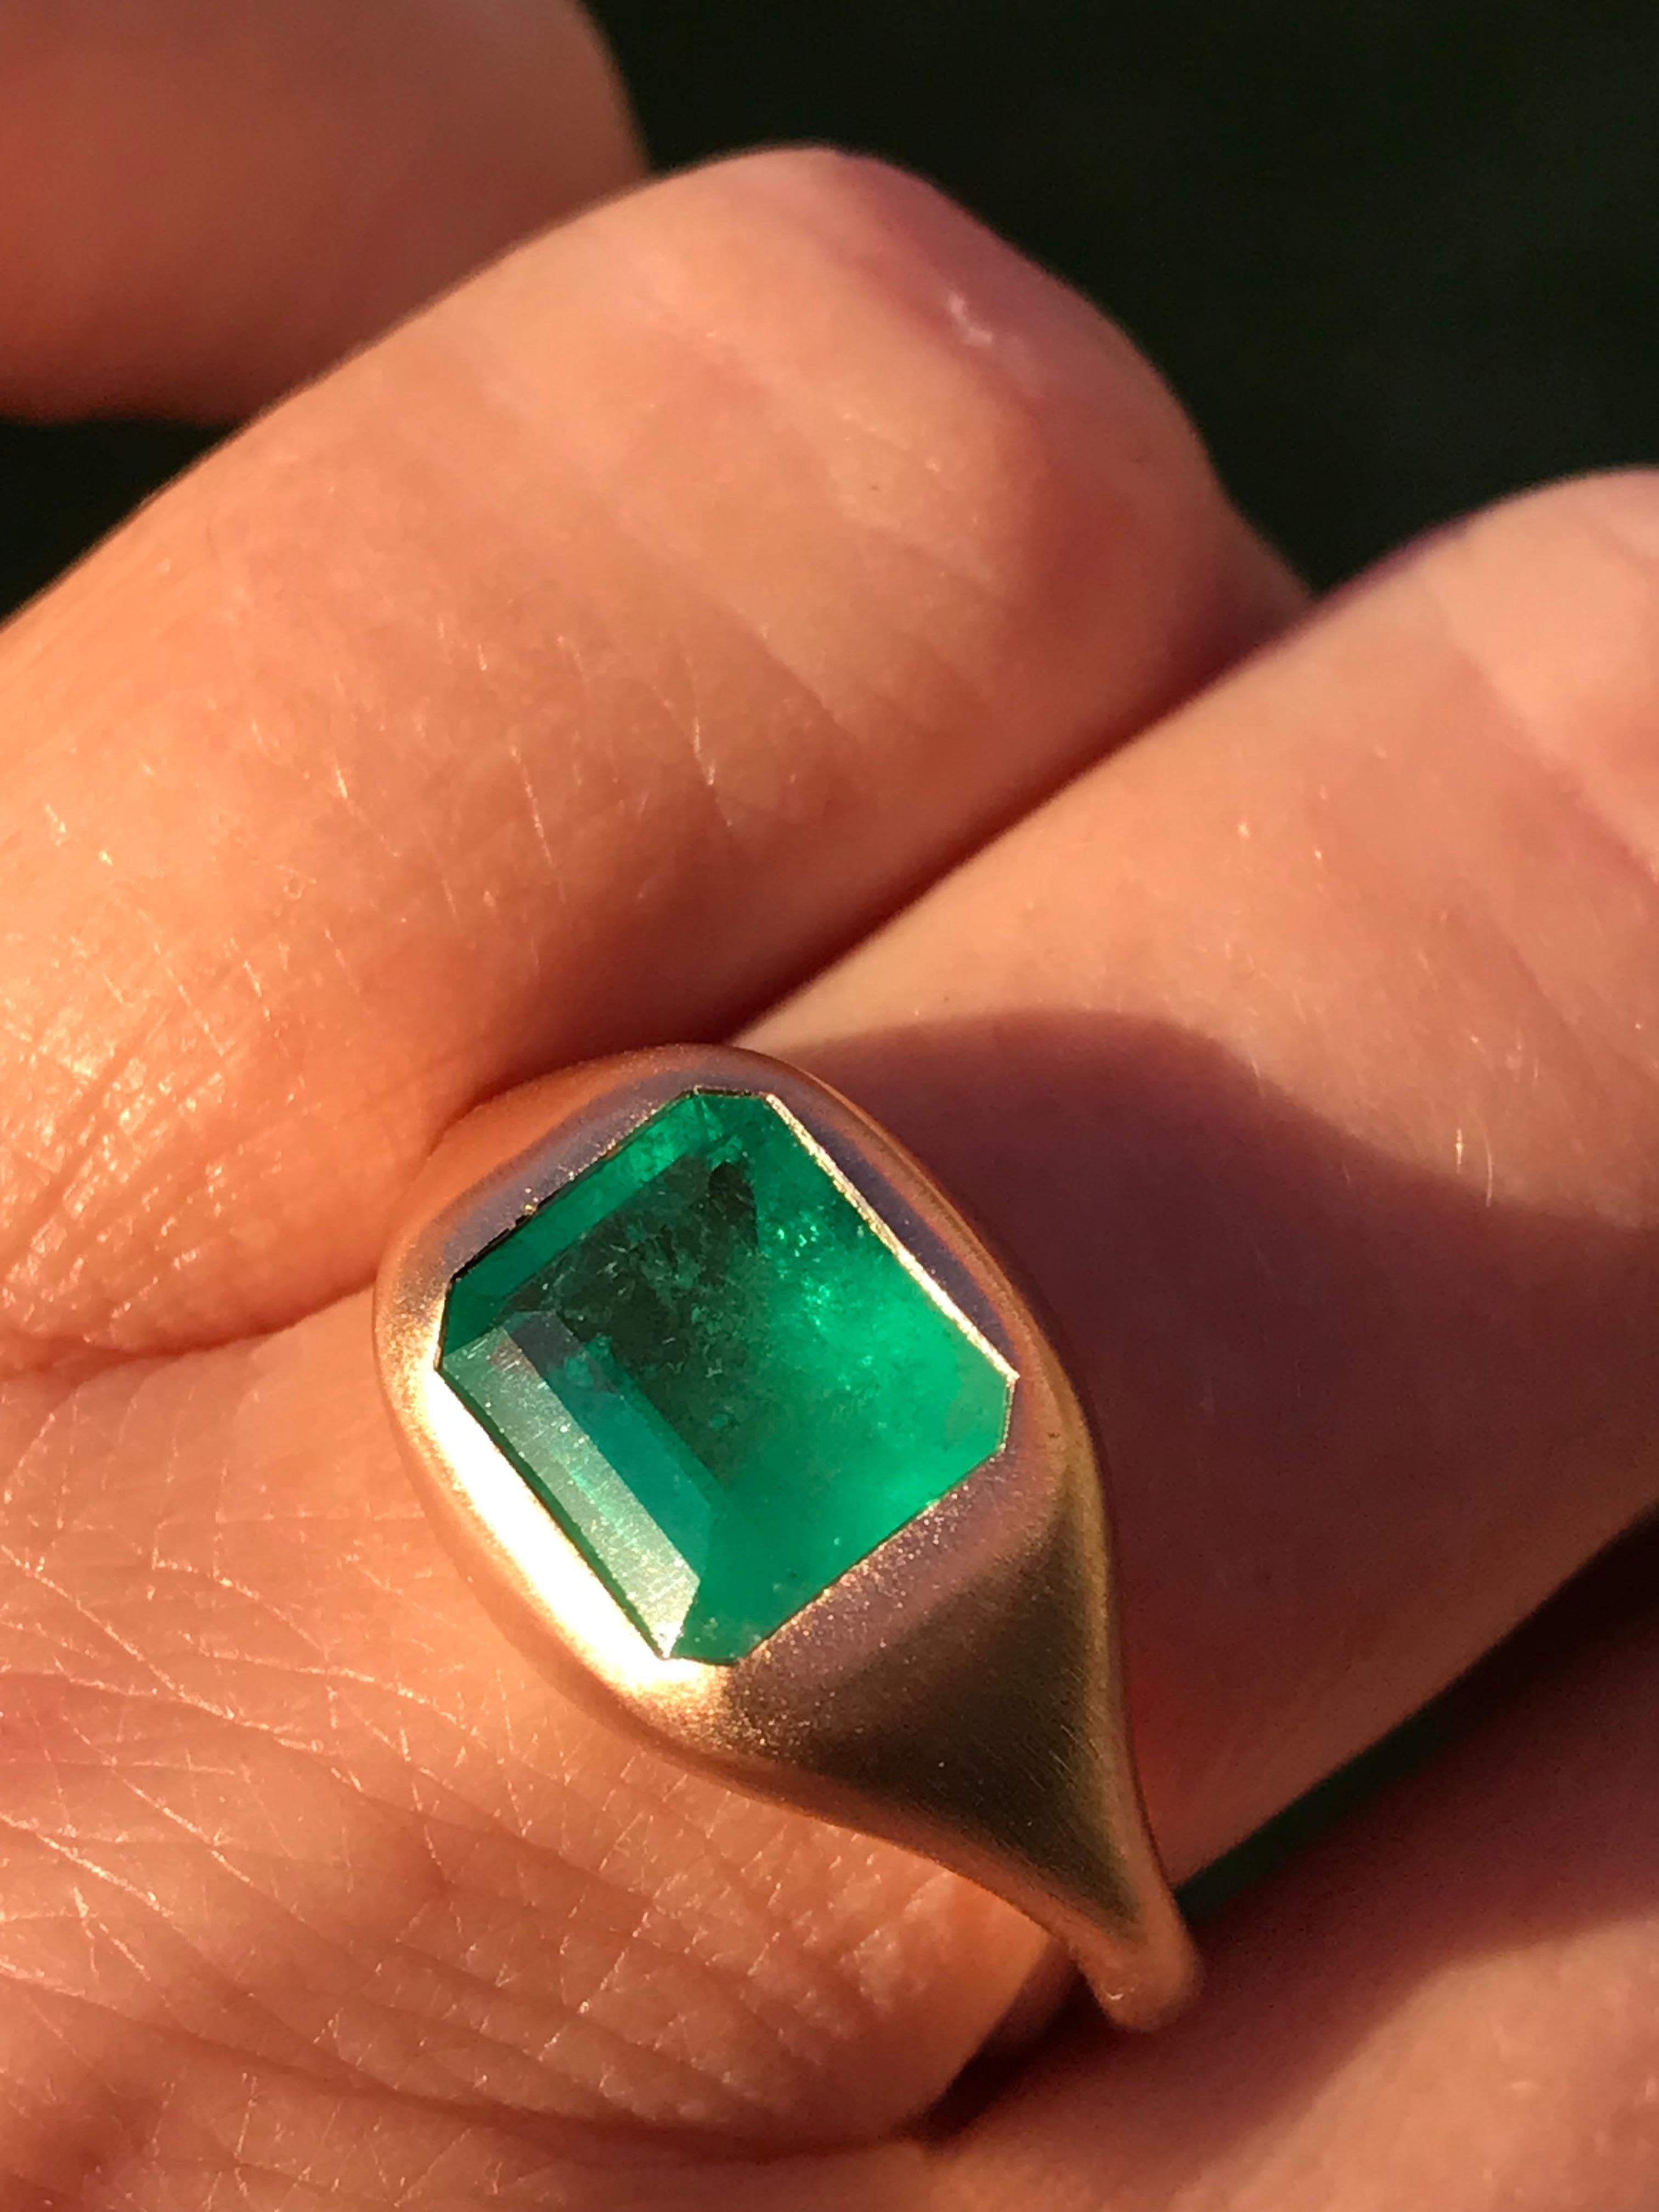 Dalben design One of a Kind 18k rose gold satin finishing ring with a 2,46 carat emerald cut certified Colombian emerald. 
Ring size7+ USA , 55 EU  re-sizable to most finger sizes. 
Bezel stone dimensions :
width 11,7 mm
height 11,3 mm
The ring has